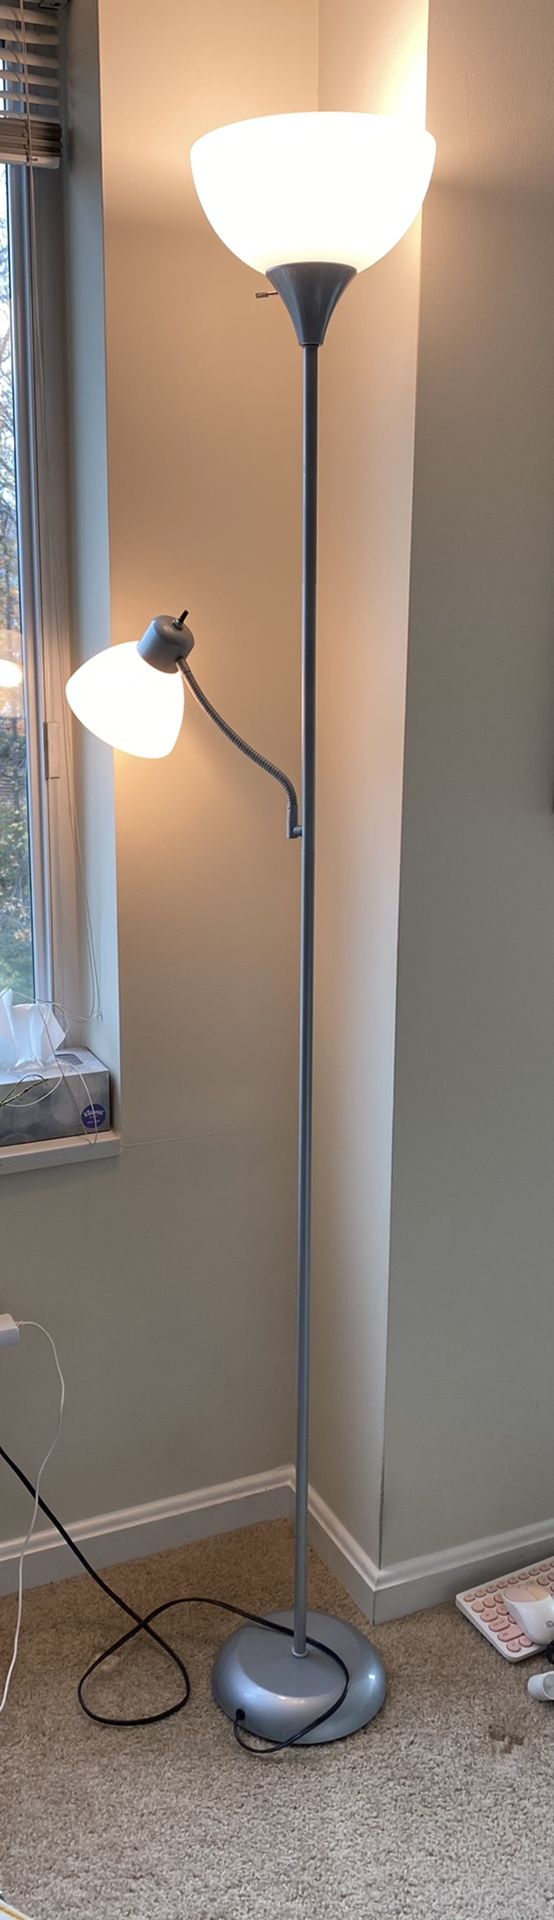 Stand lamp 3 way with reading light